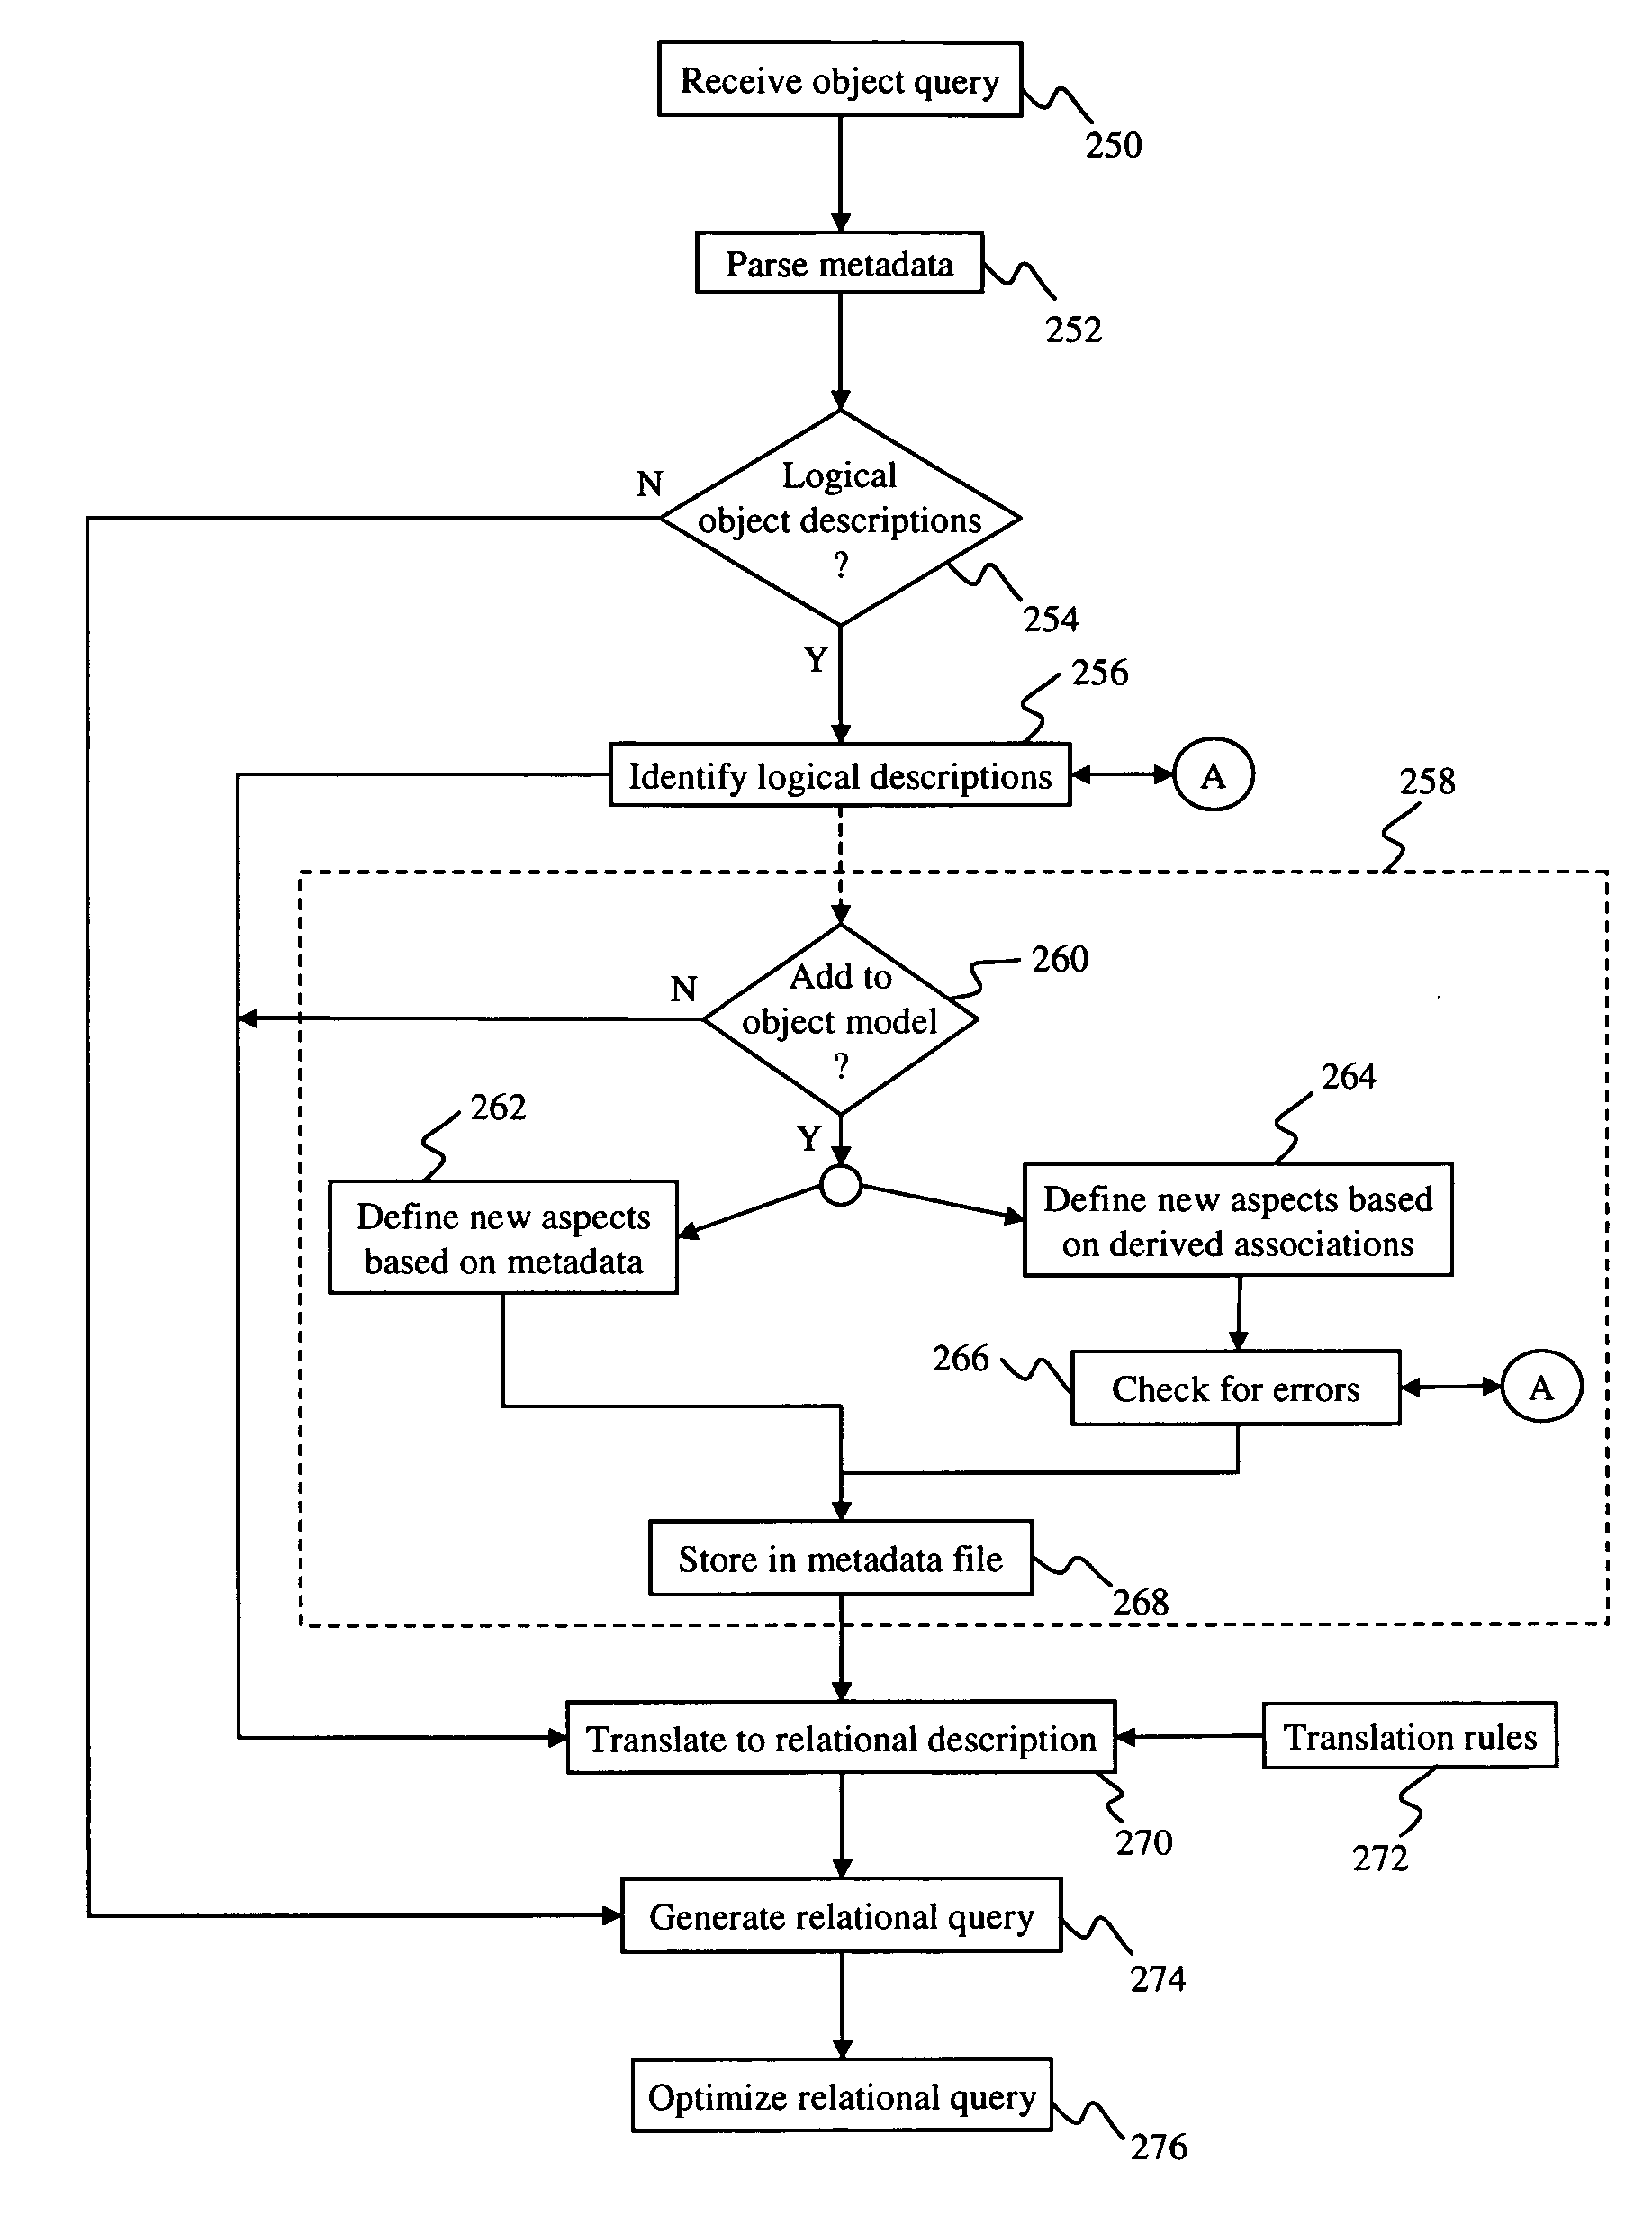 System and method for retrieving data from a relational database management system